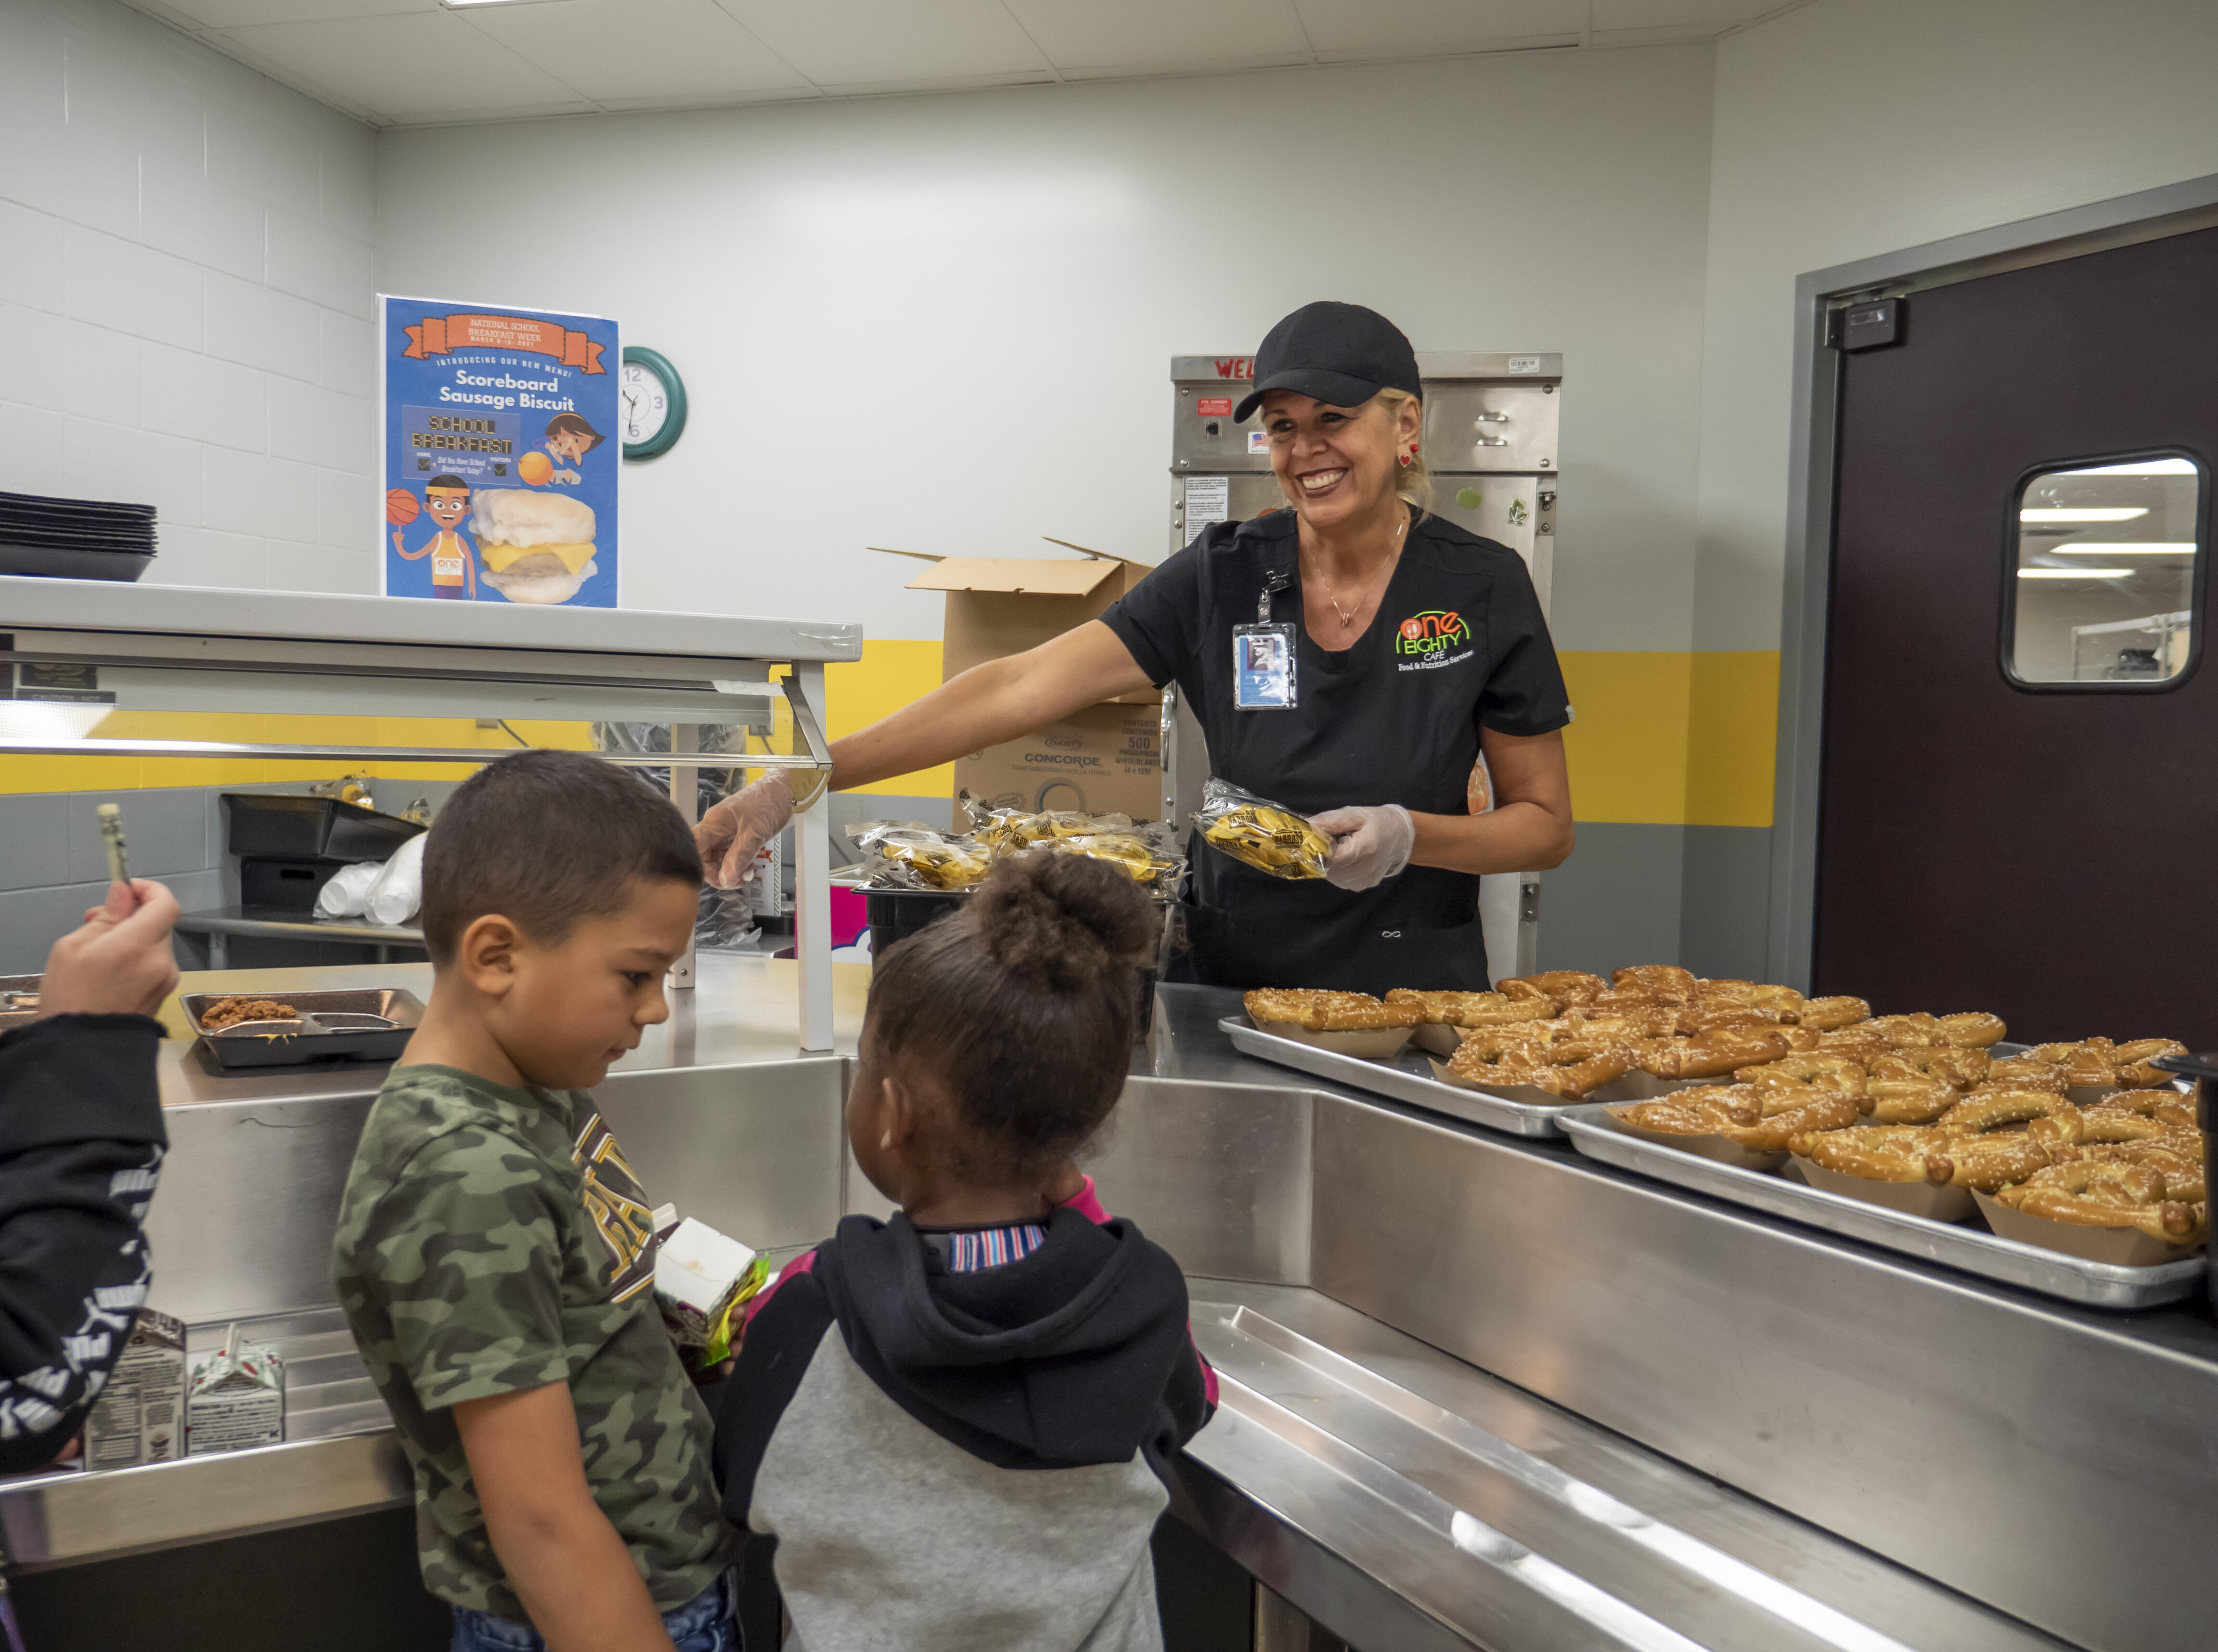 Cafeteria worker serving students